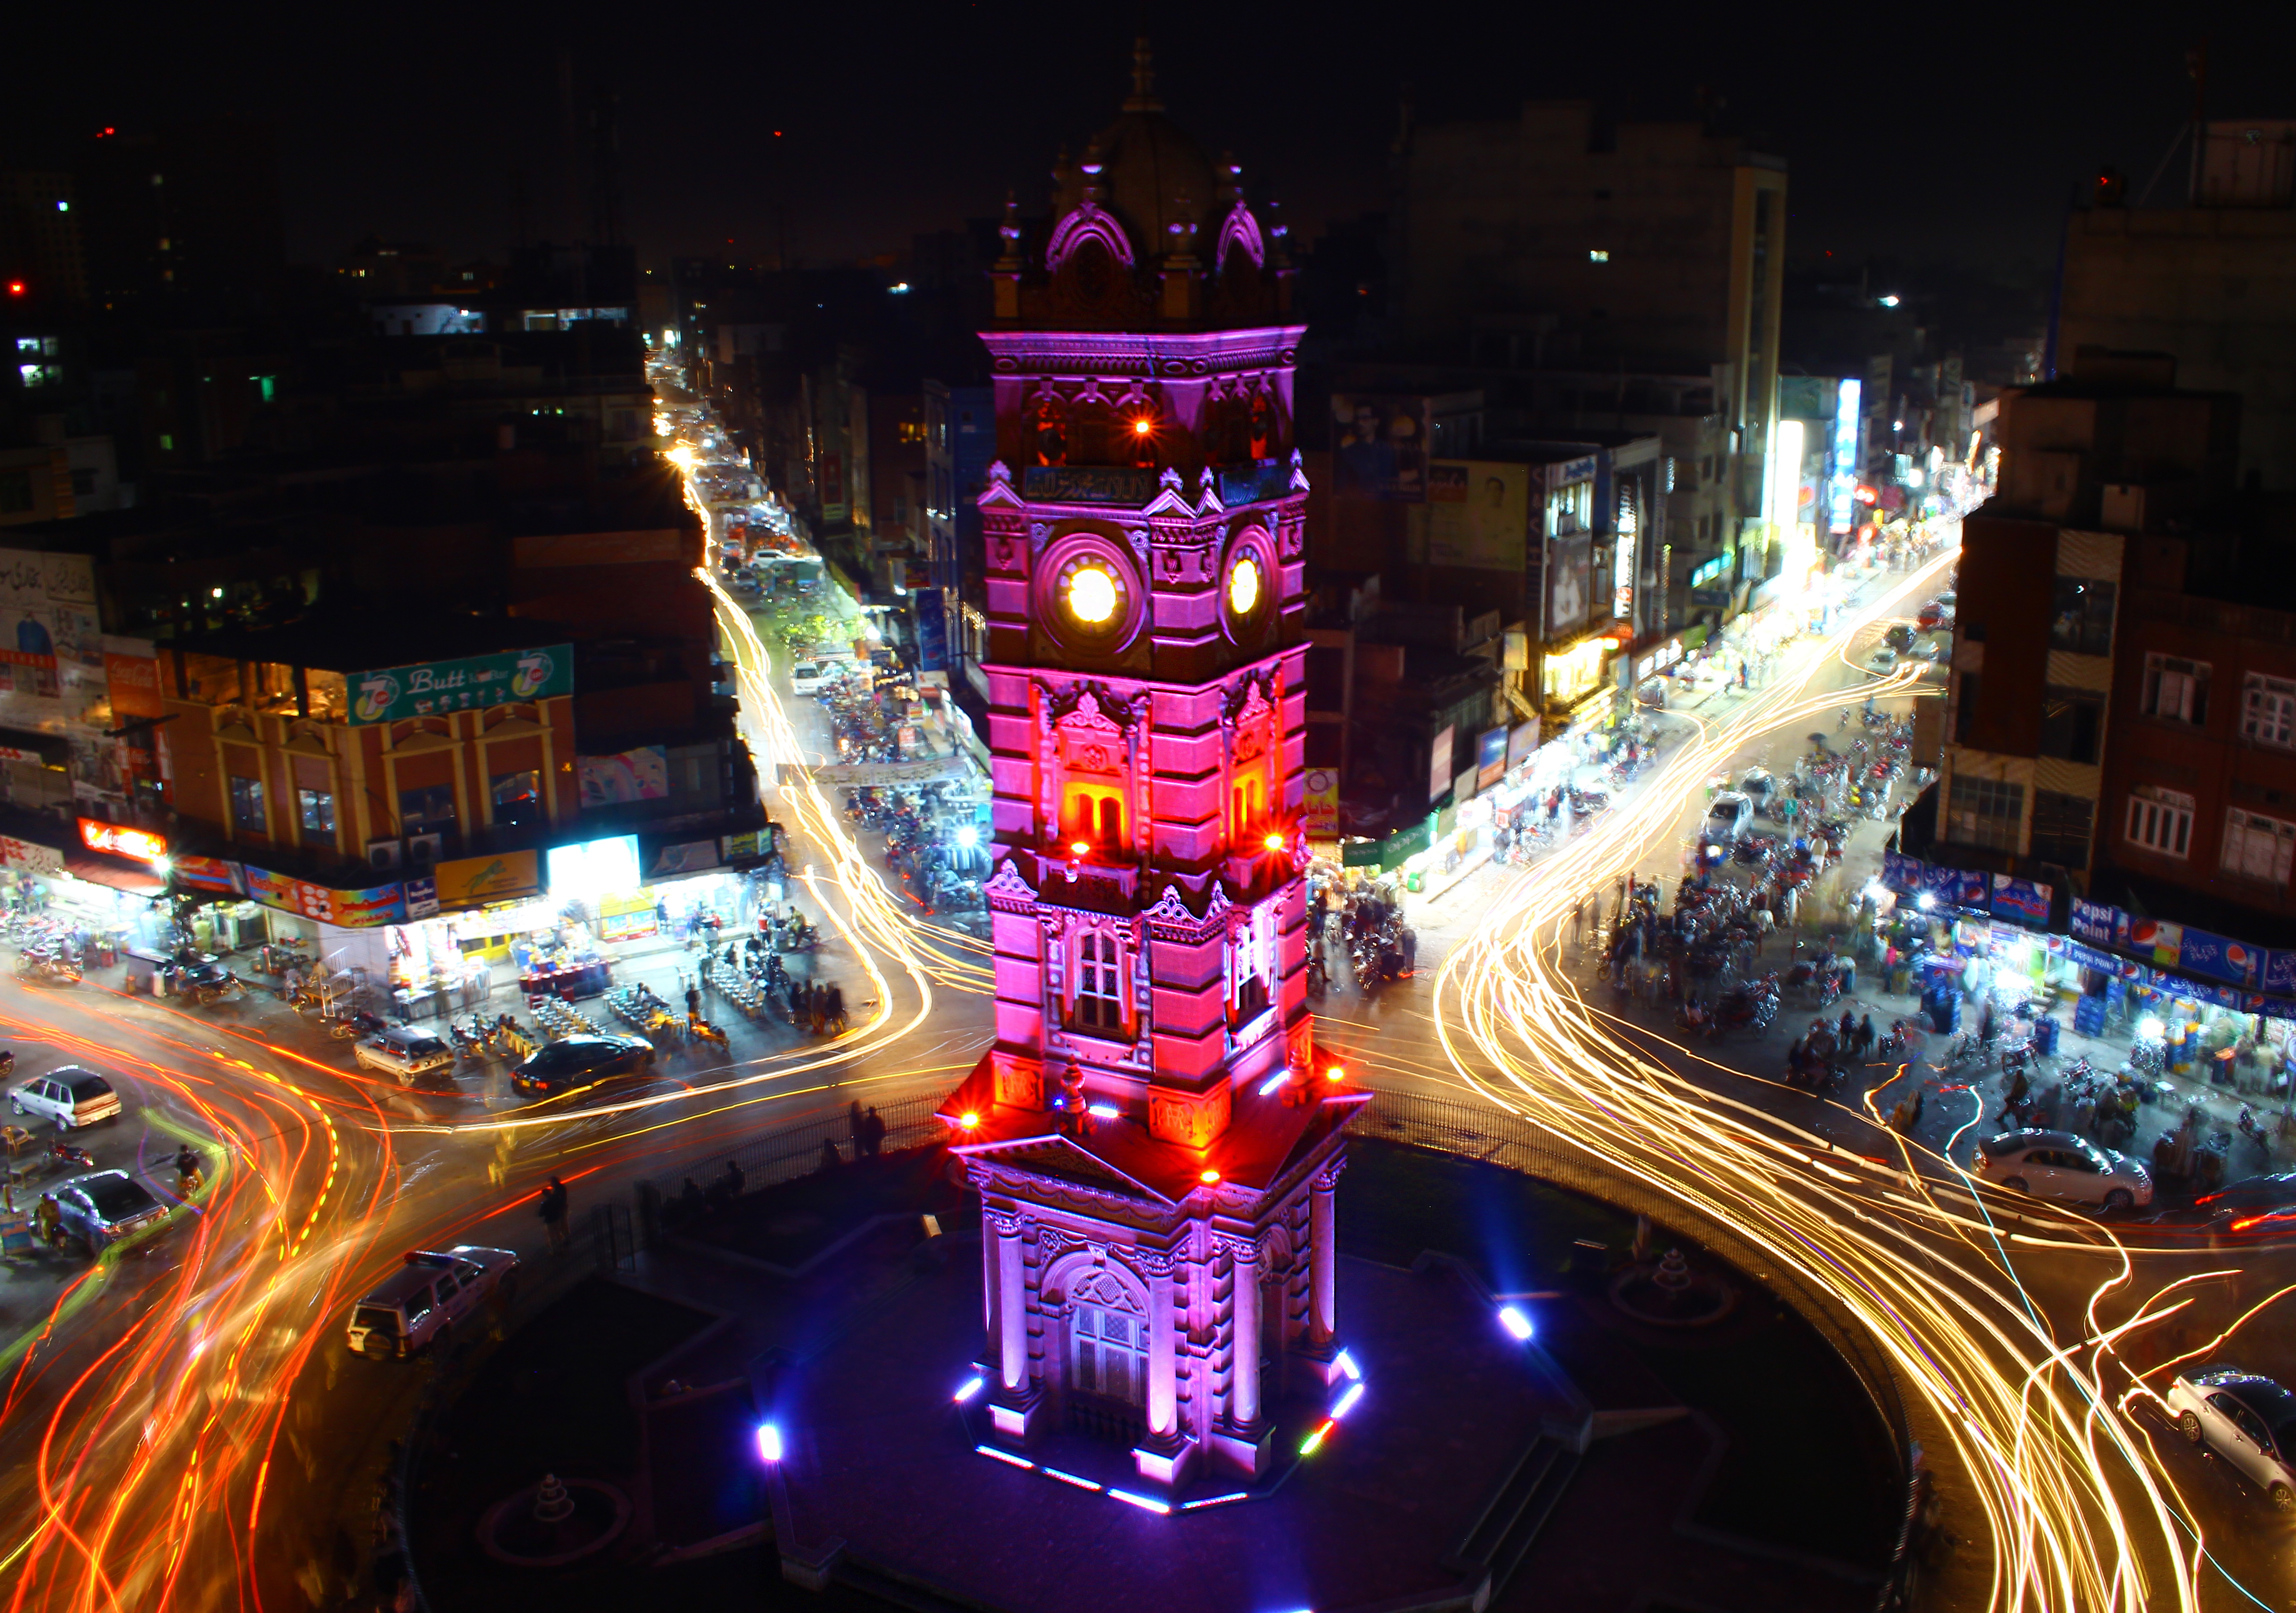 Clock Tower in Faisalabad, Home to agricultural university and textile productioUsman Nadeem [CC BY-SA 4.0 (https://creativecommons.org/licenses/by-sa/4.0)]n Credit: 